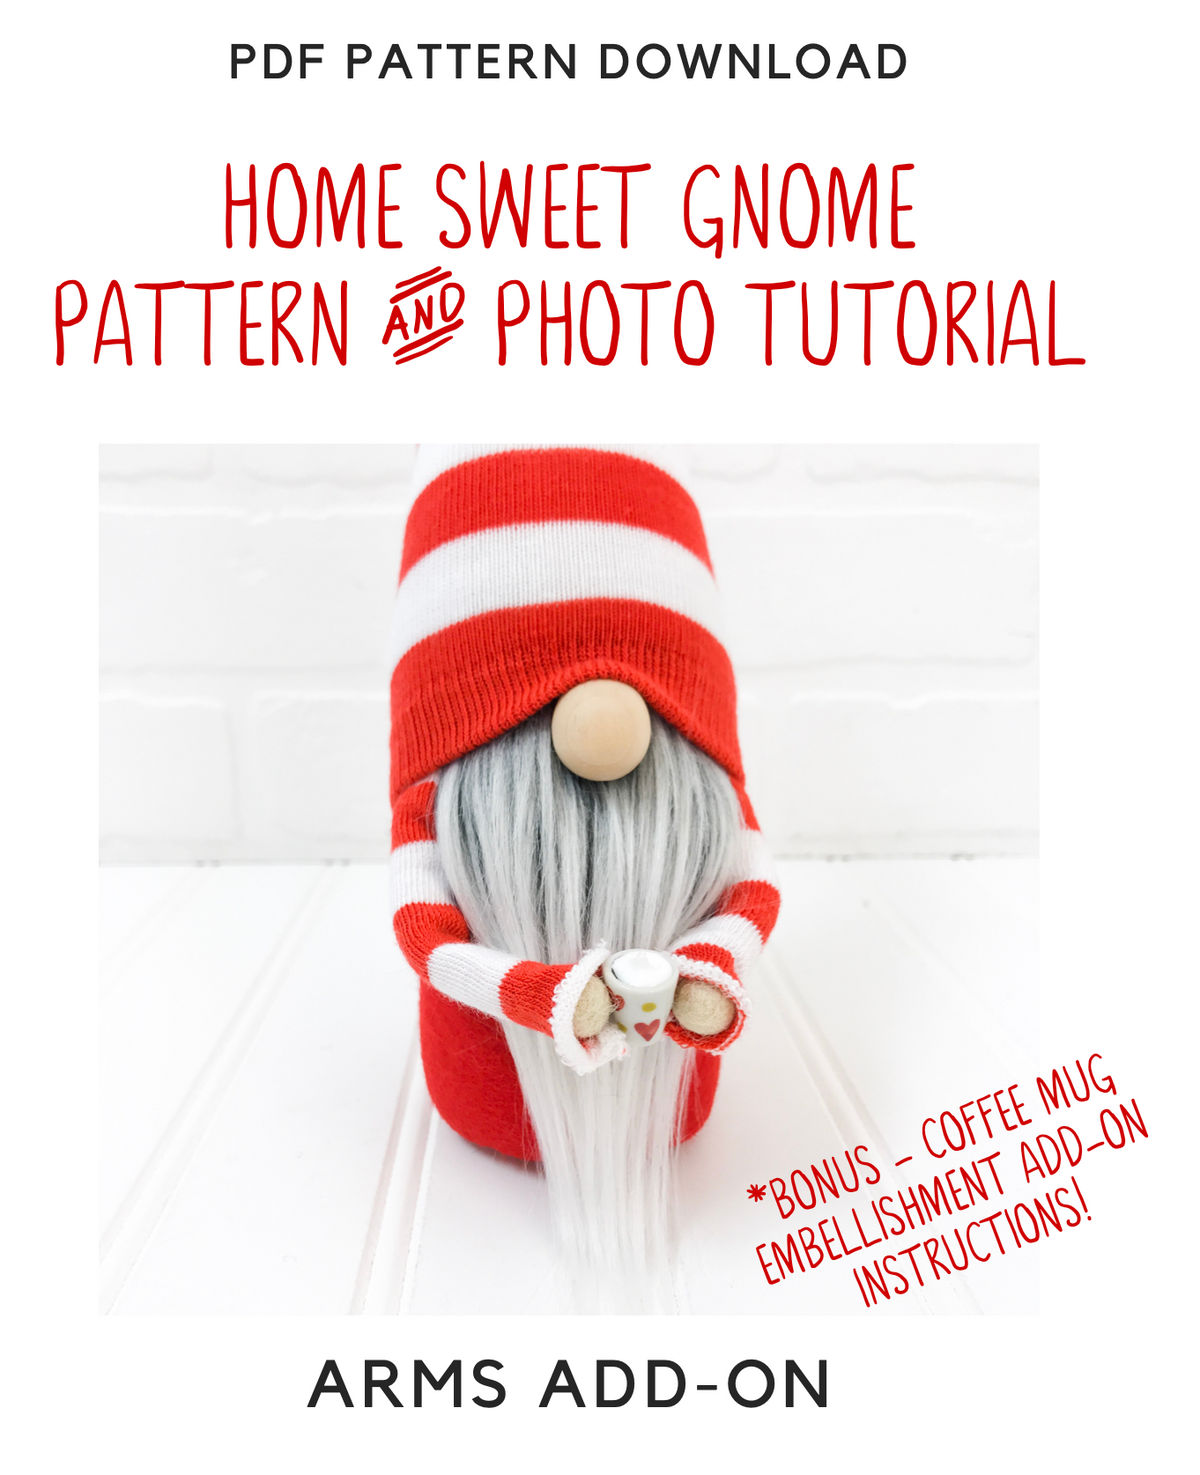 ADD-ON - DIY Gnome Arms Pattern & Tutorial - 2002